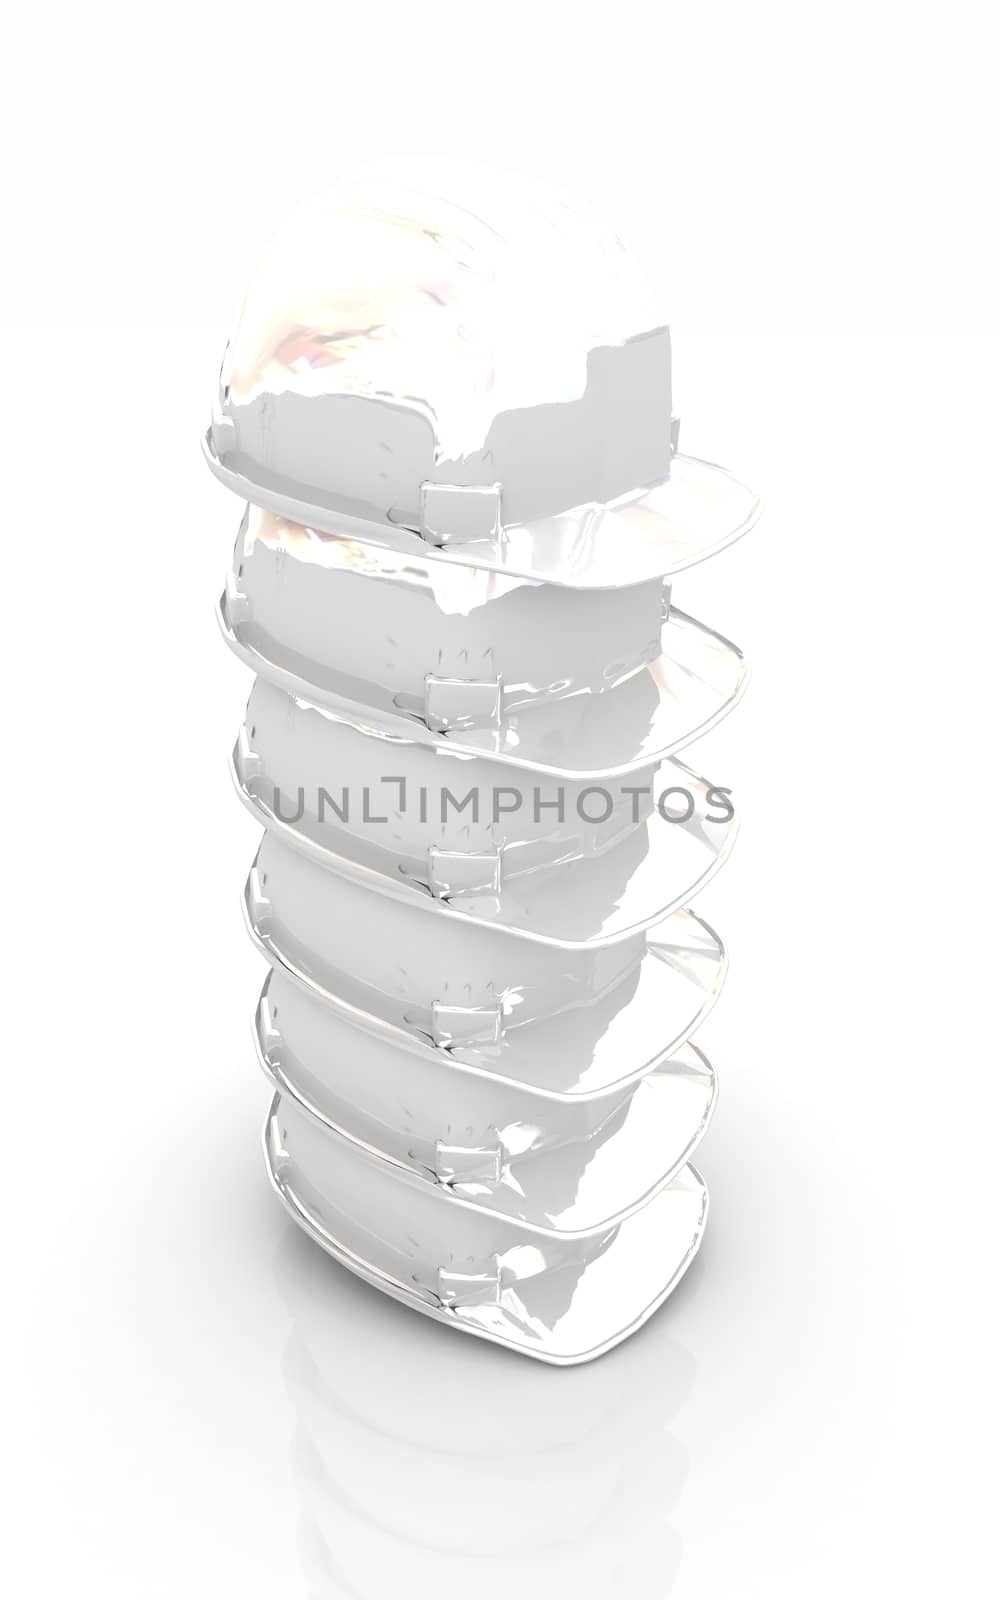 Hard hats on a white background